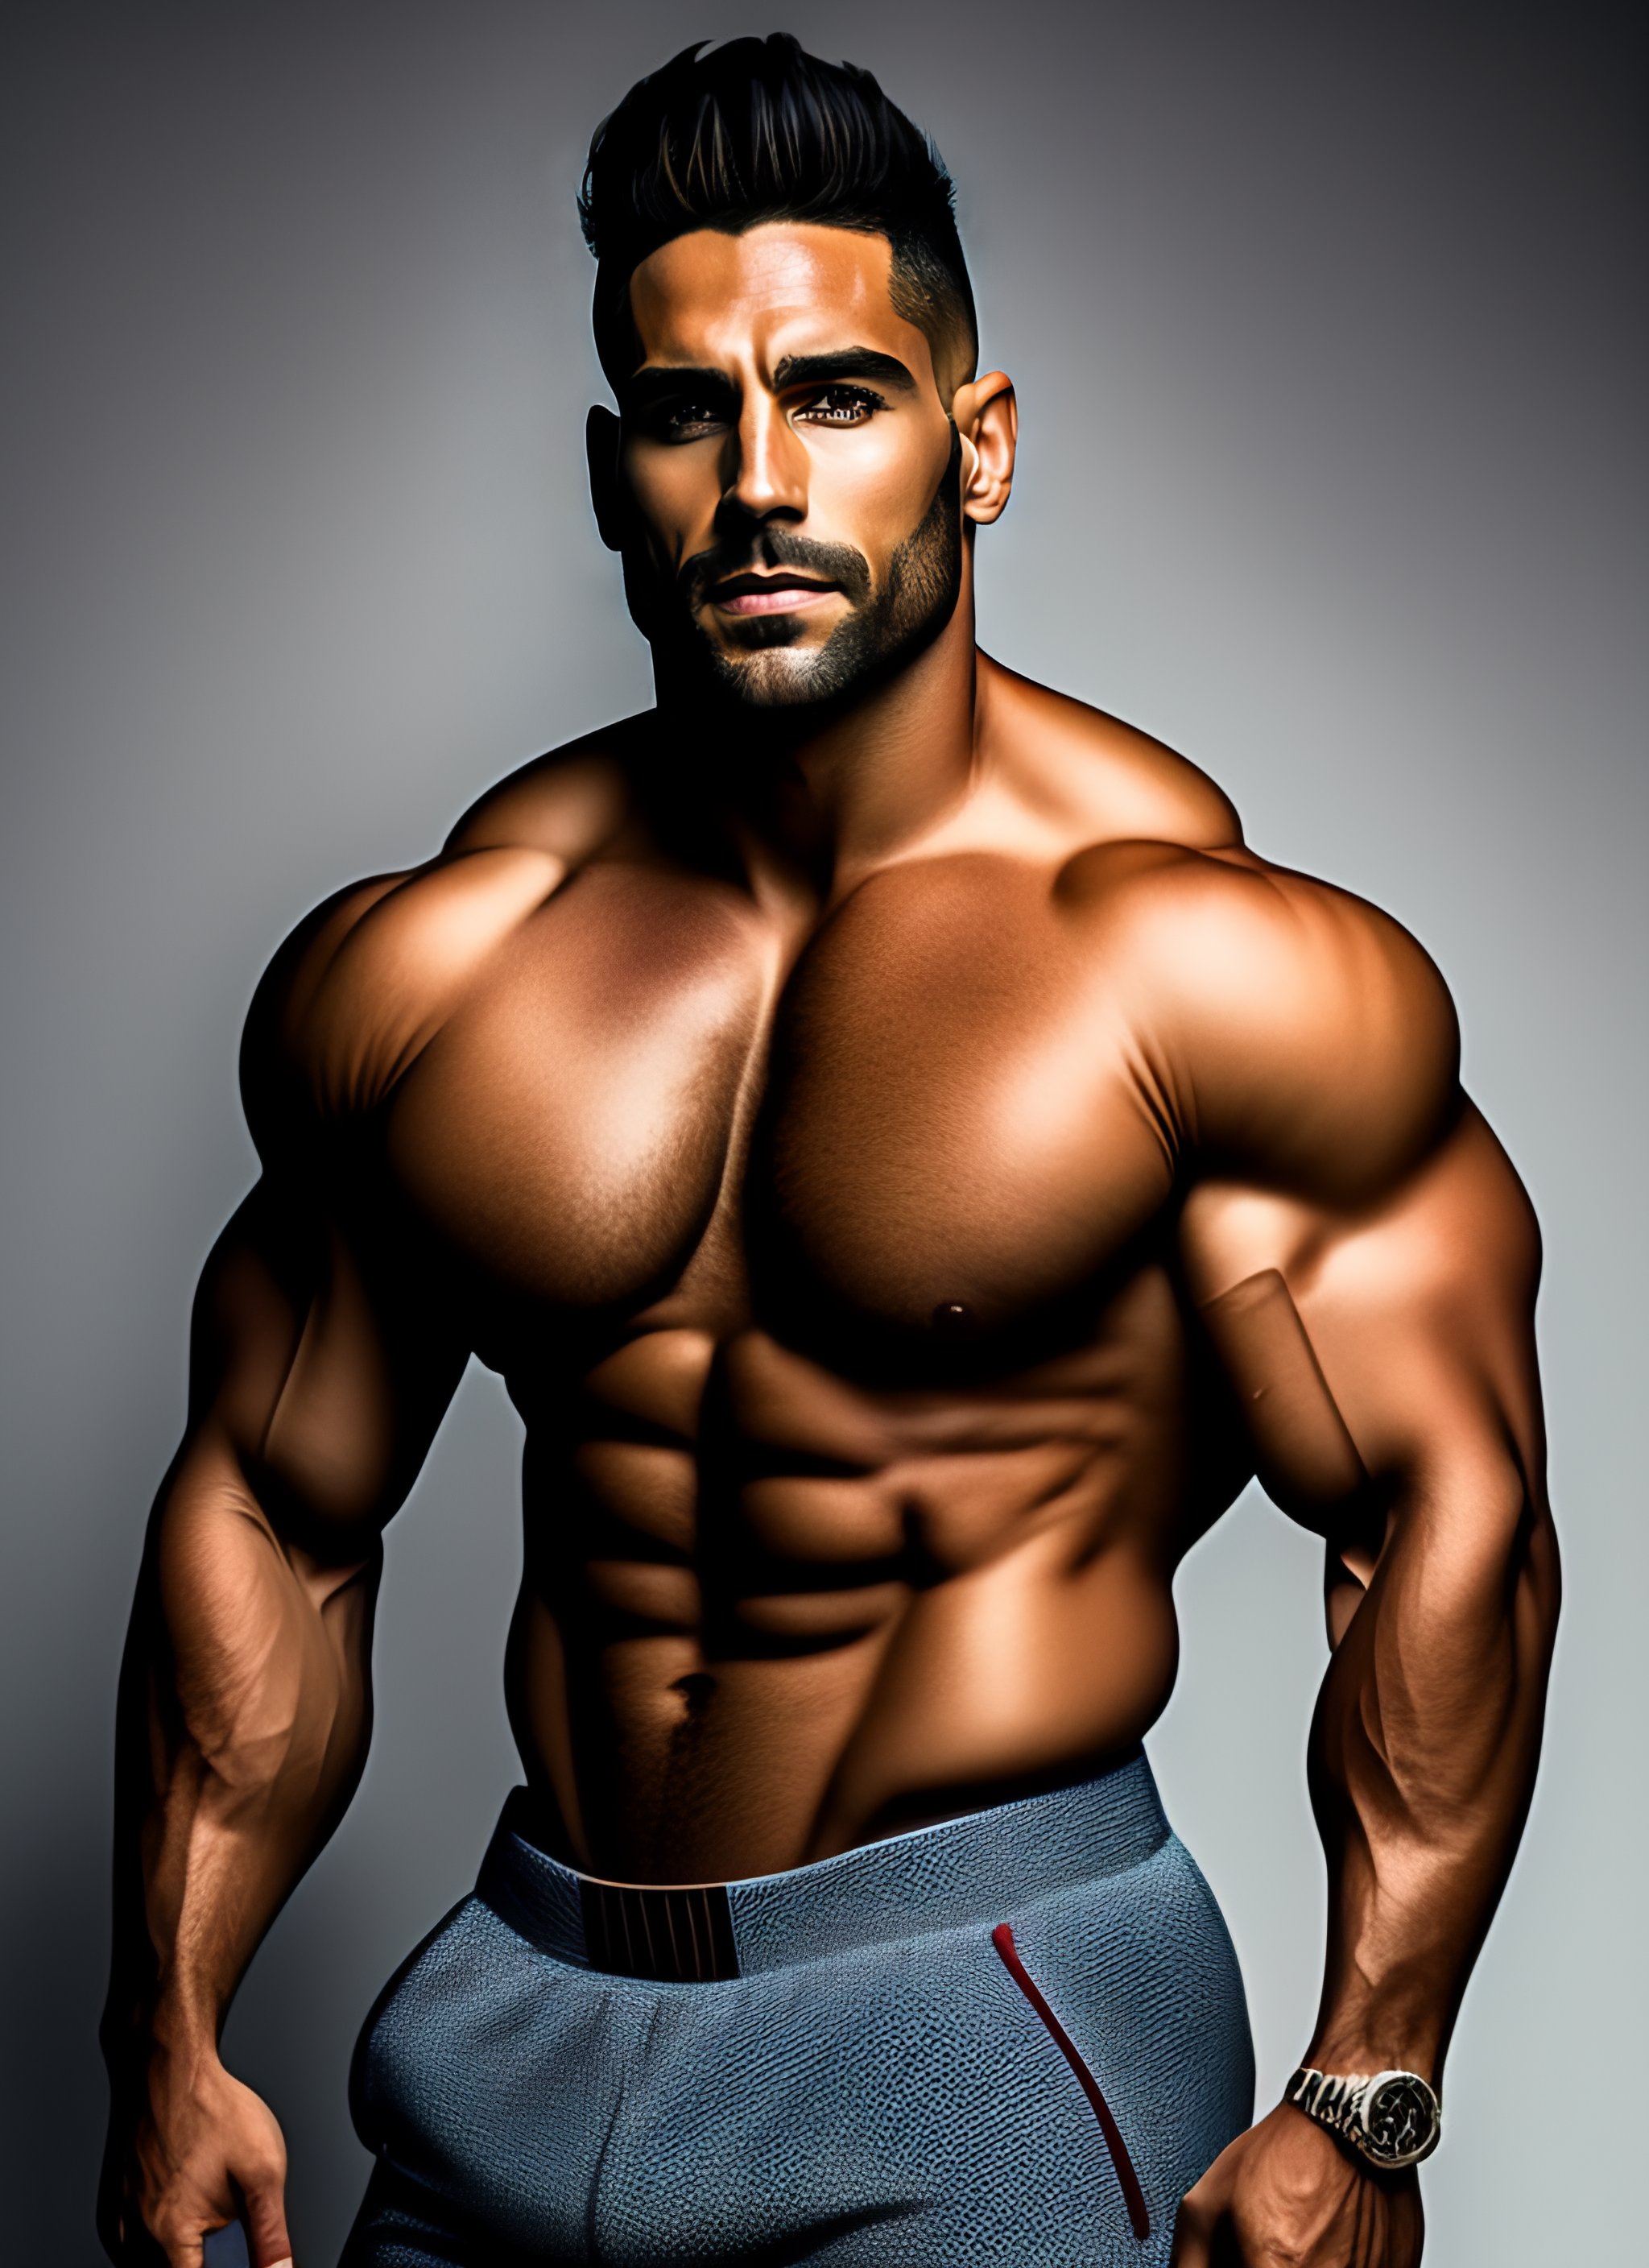 Lexica Attractive Fit 30 Year Old Spanish Man Big Pecs And Abs Full Shot Wearing A Crop Top 